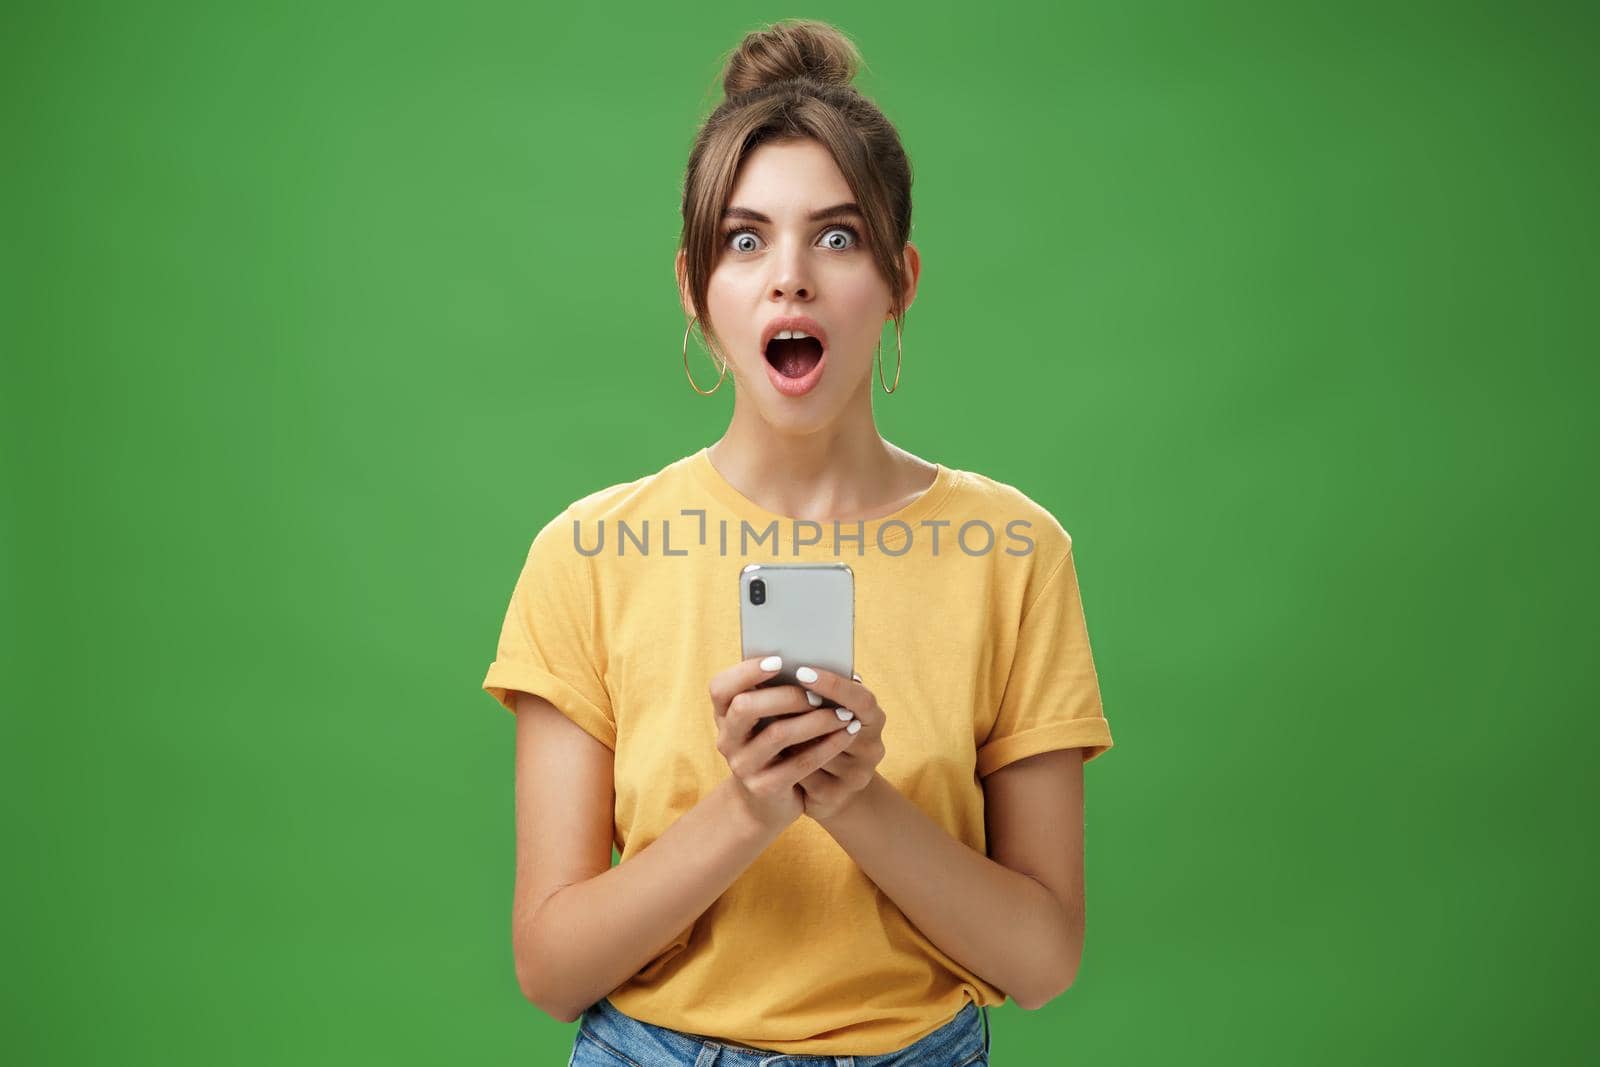 Portrait of shocked speechless and impressed beautiful white girl with combed hair in yellow t-shirt holding smartphone, dropping jaw from excitement reacting to cool app over green background.